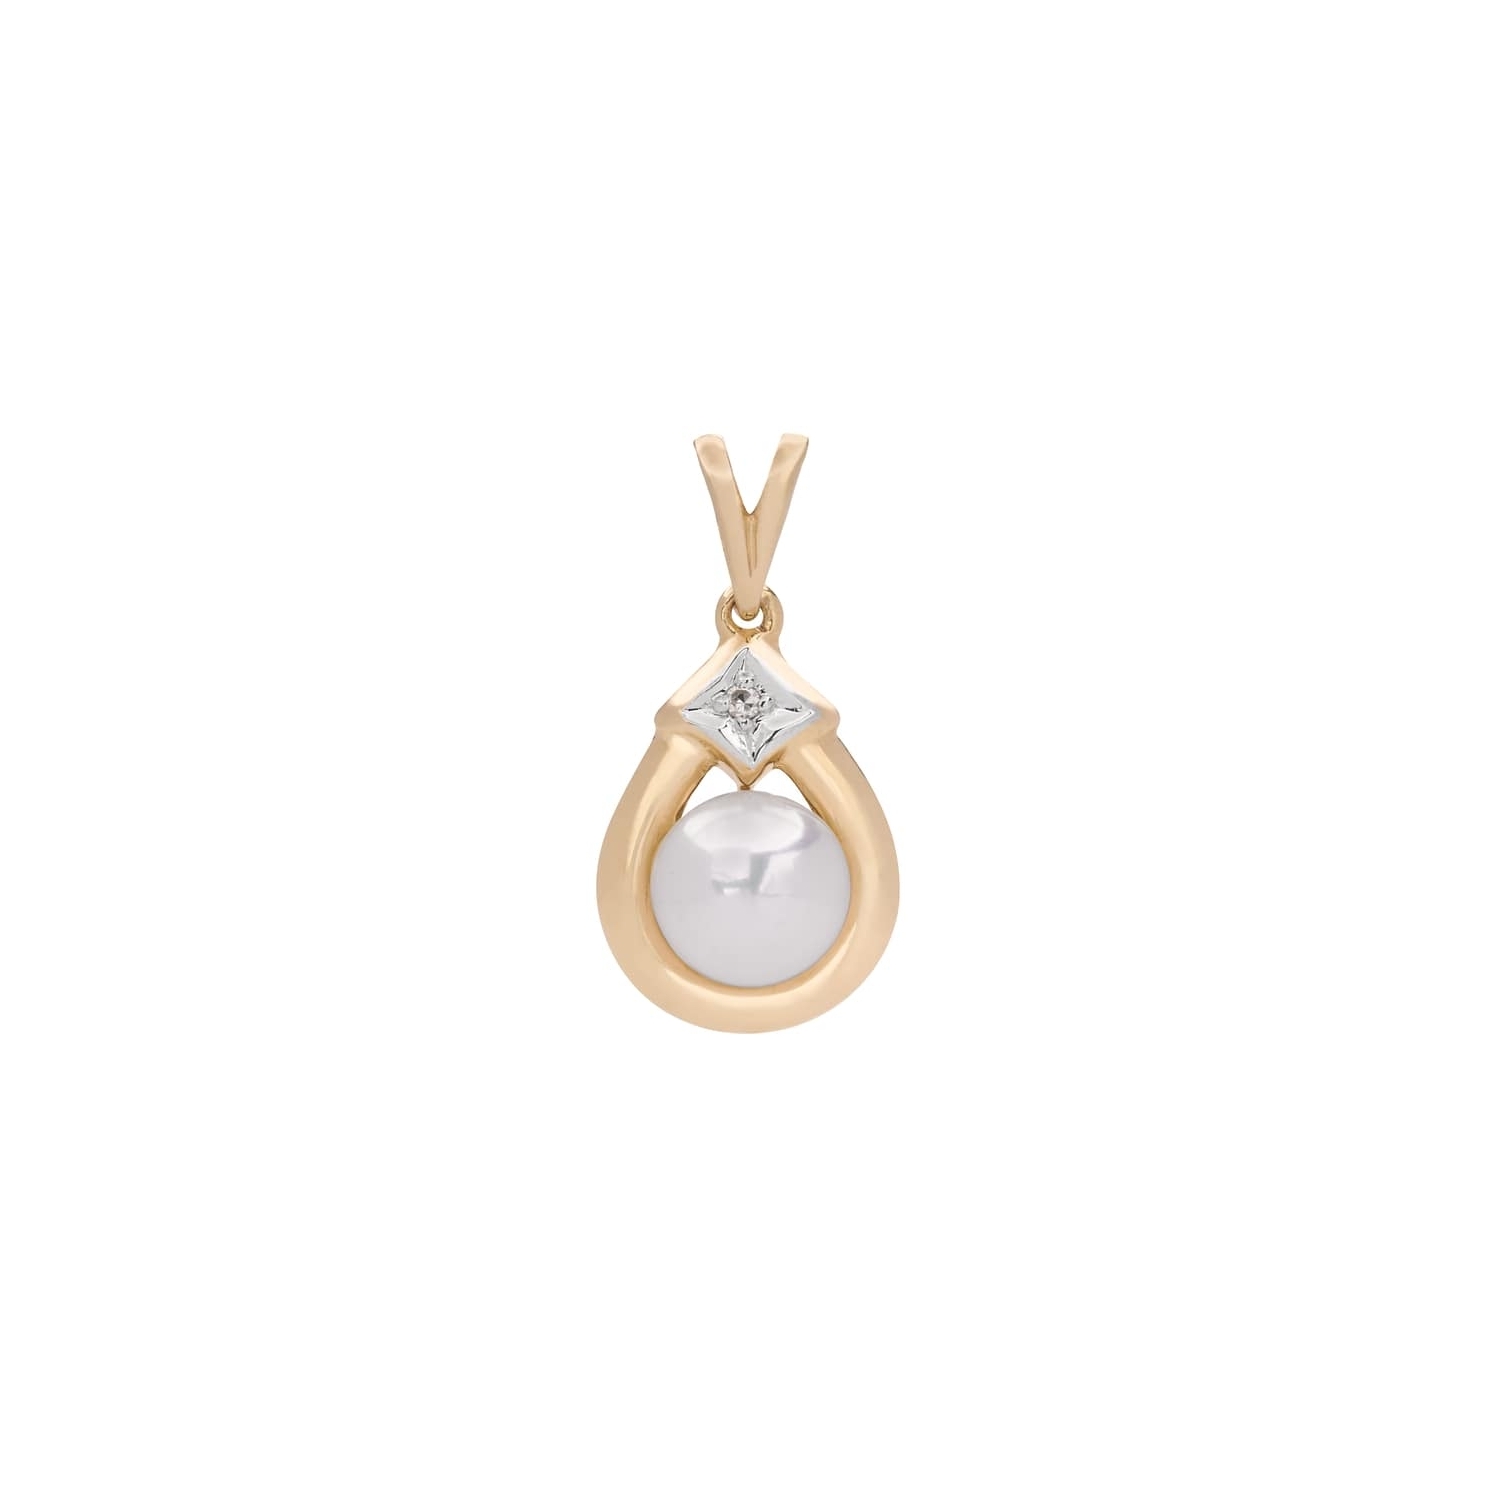 Gold pendant with gemstones "Pearl"